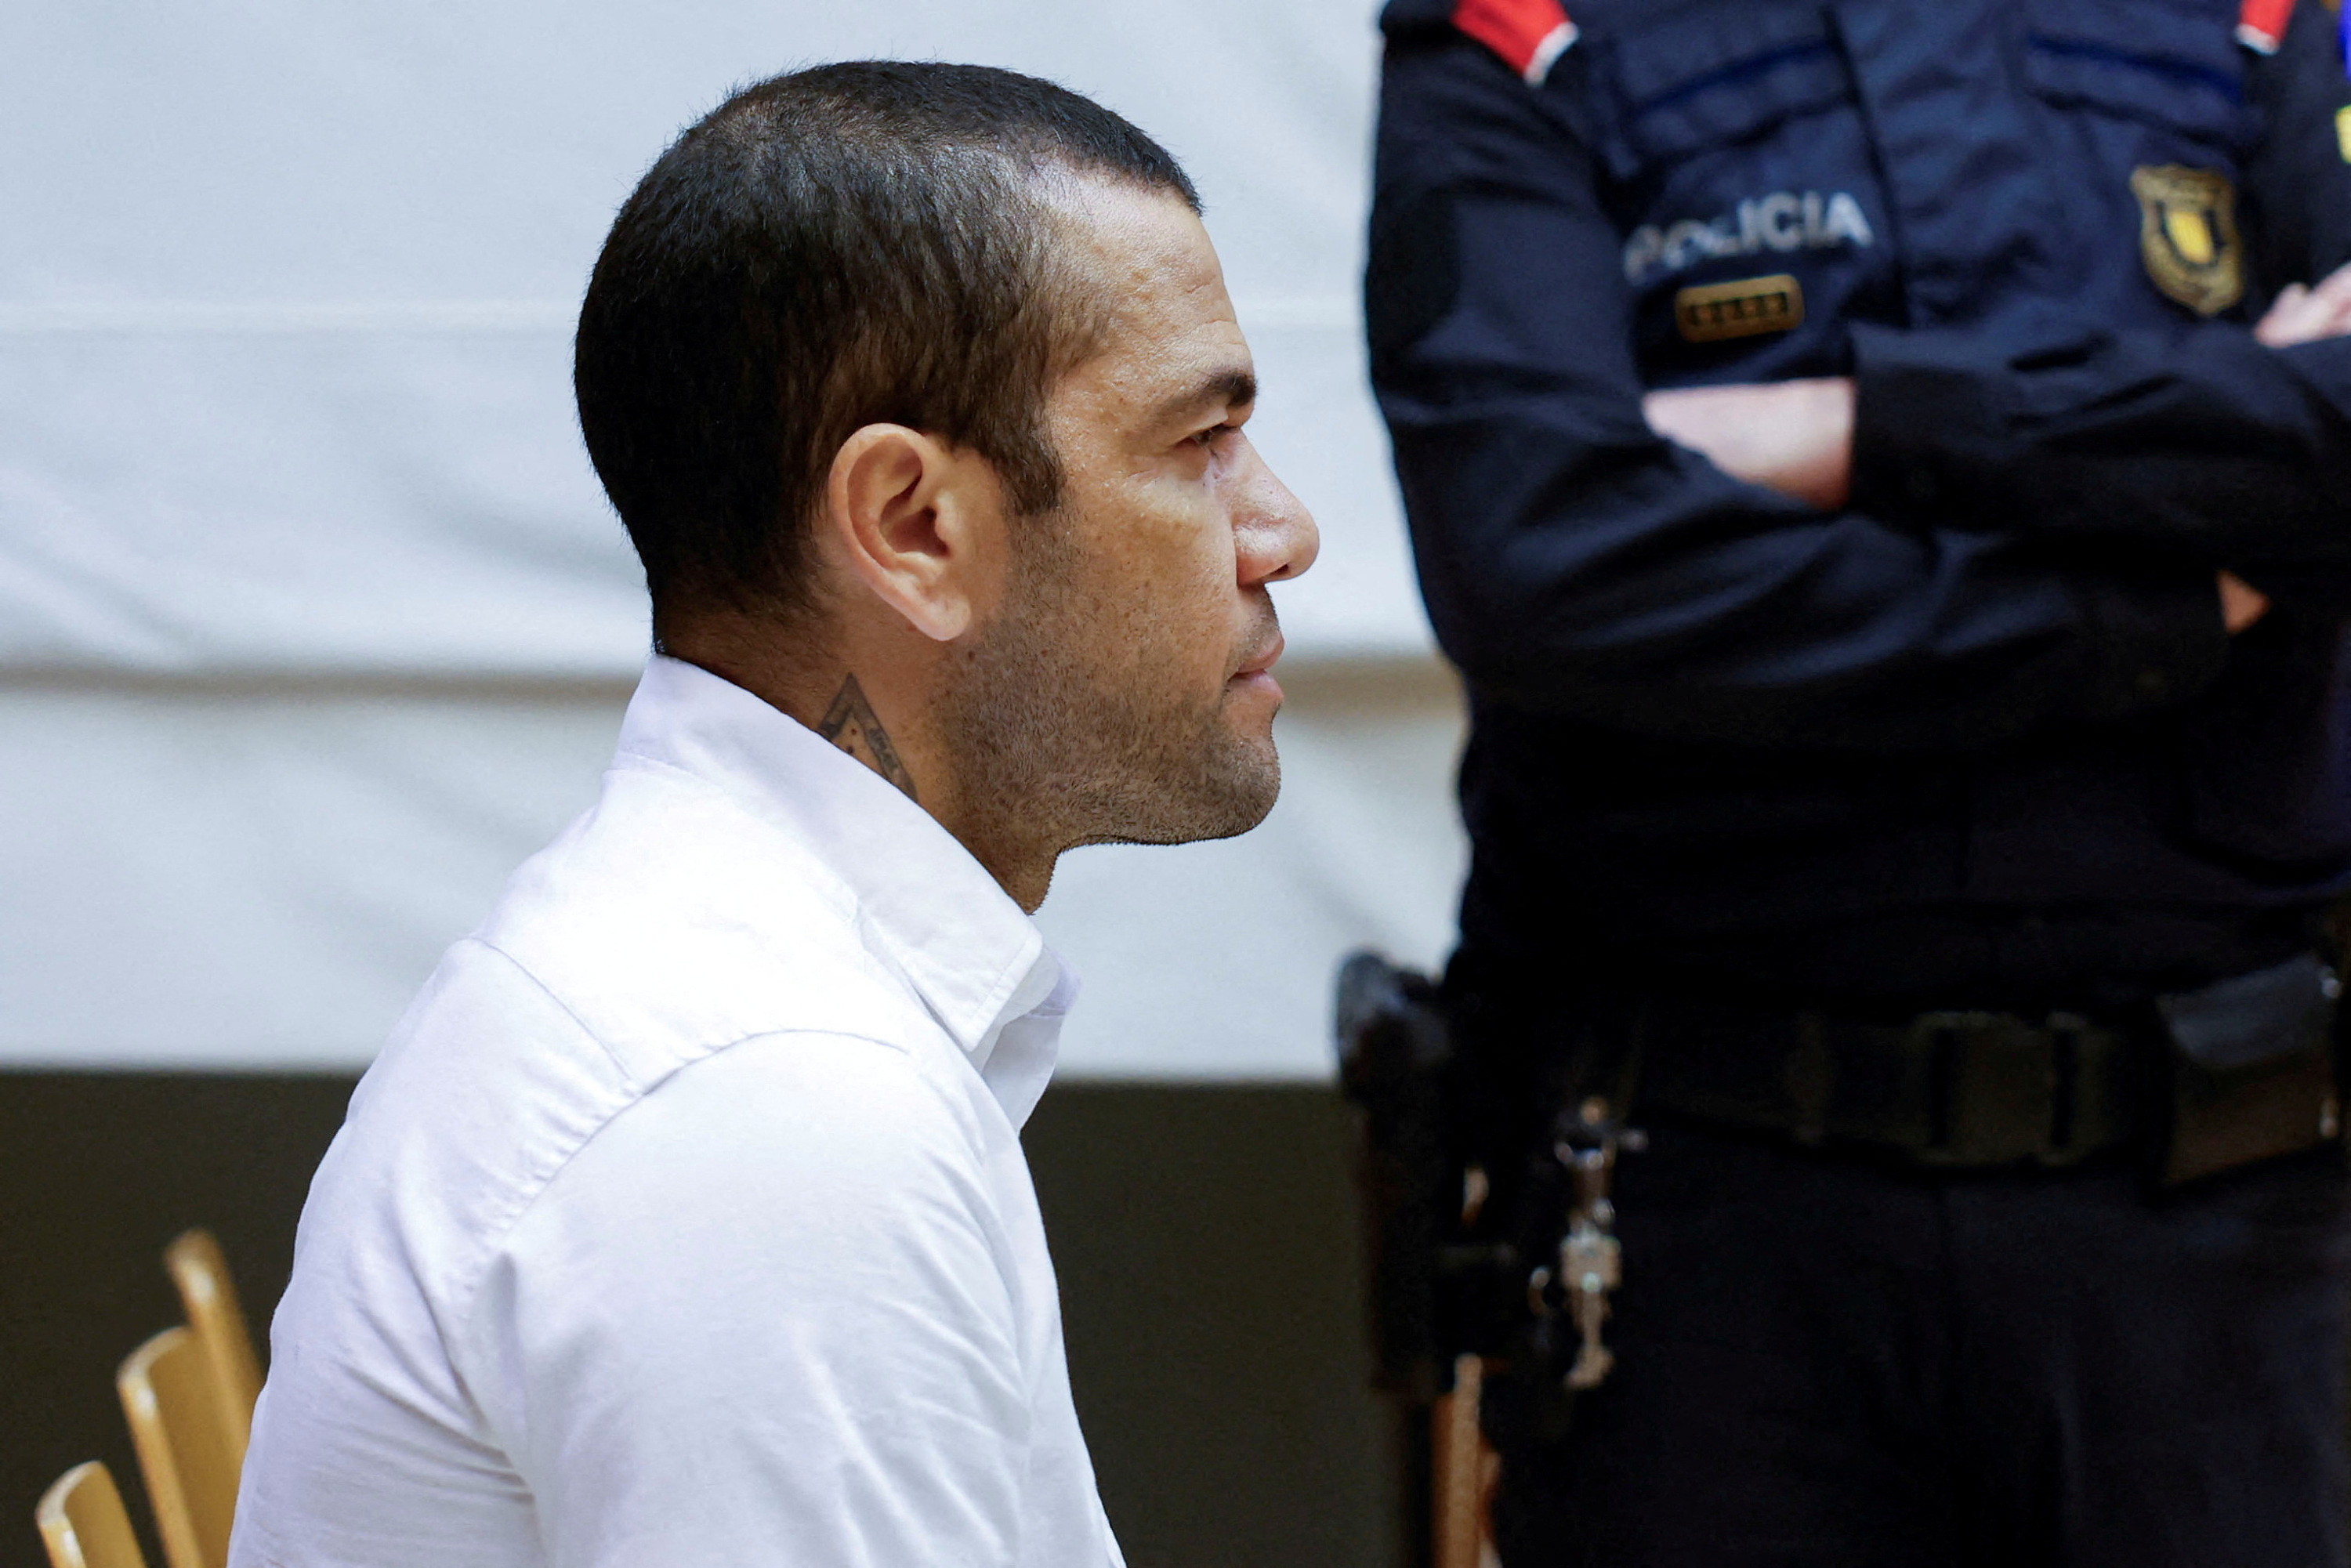 Football: Dani Alves sentenced to four and a half years in prison for rape